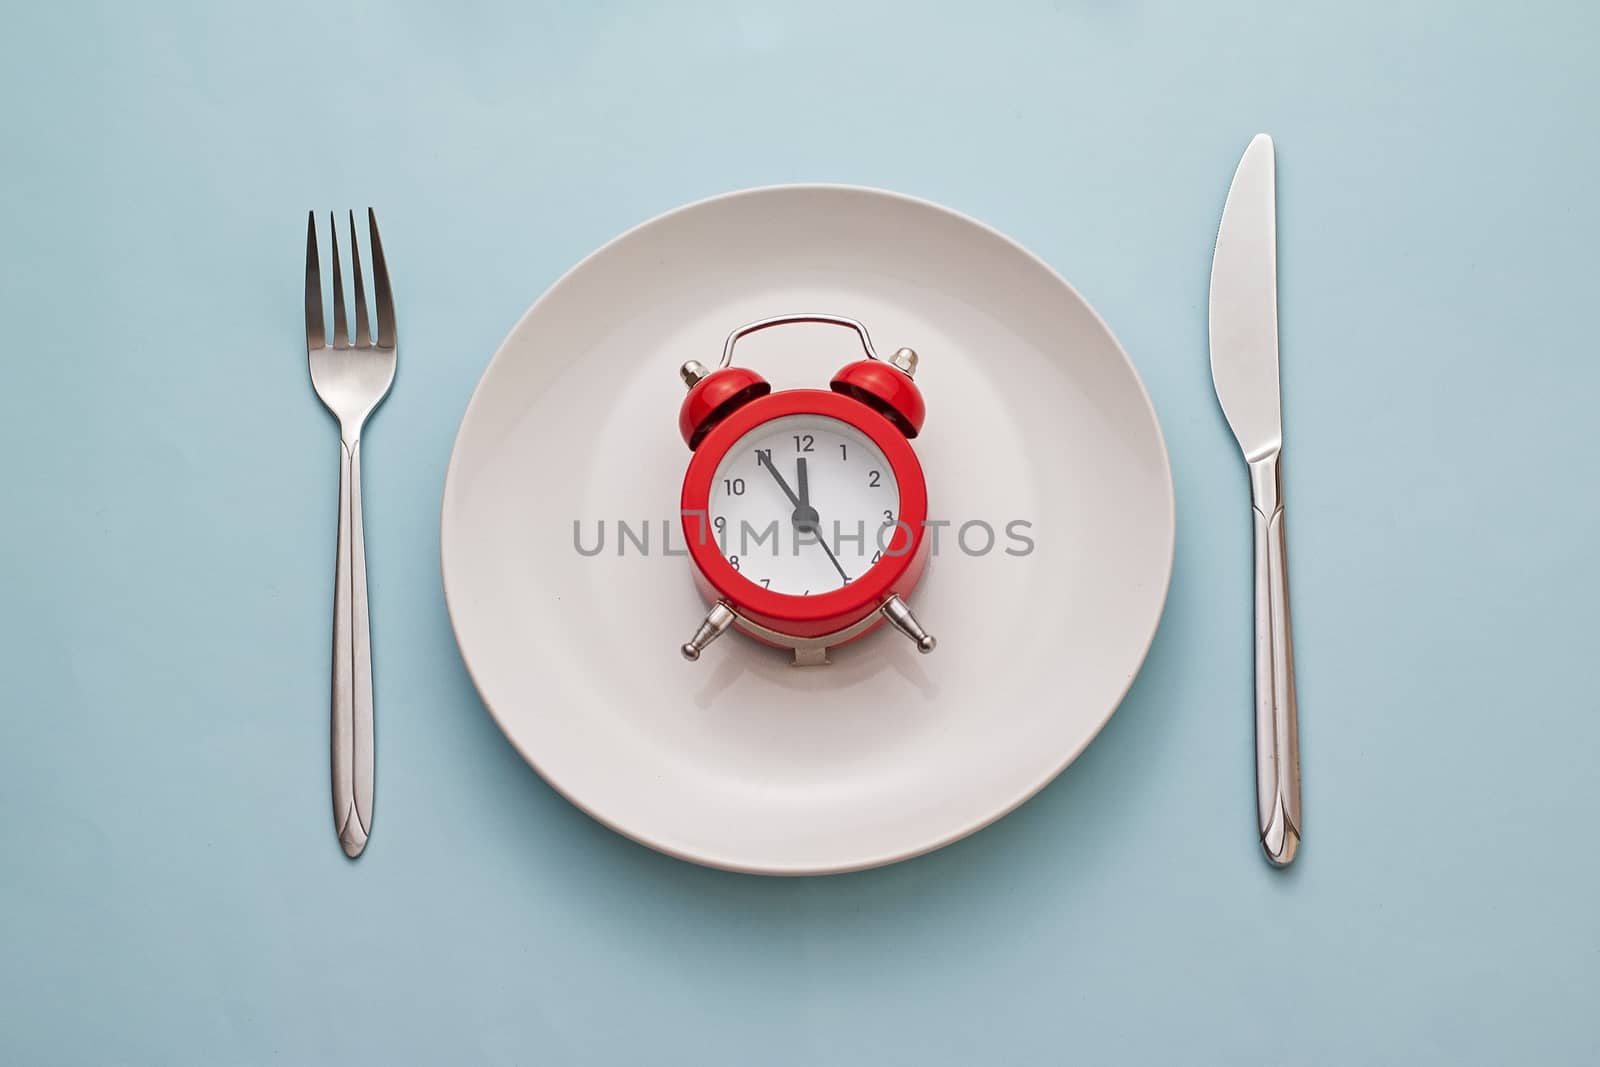 Red alarm clock on a clean white dinner plate with knife and fork alongside on a blue background viewed from above